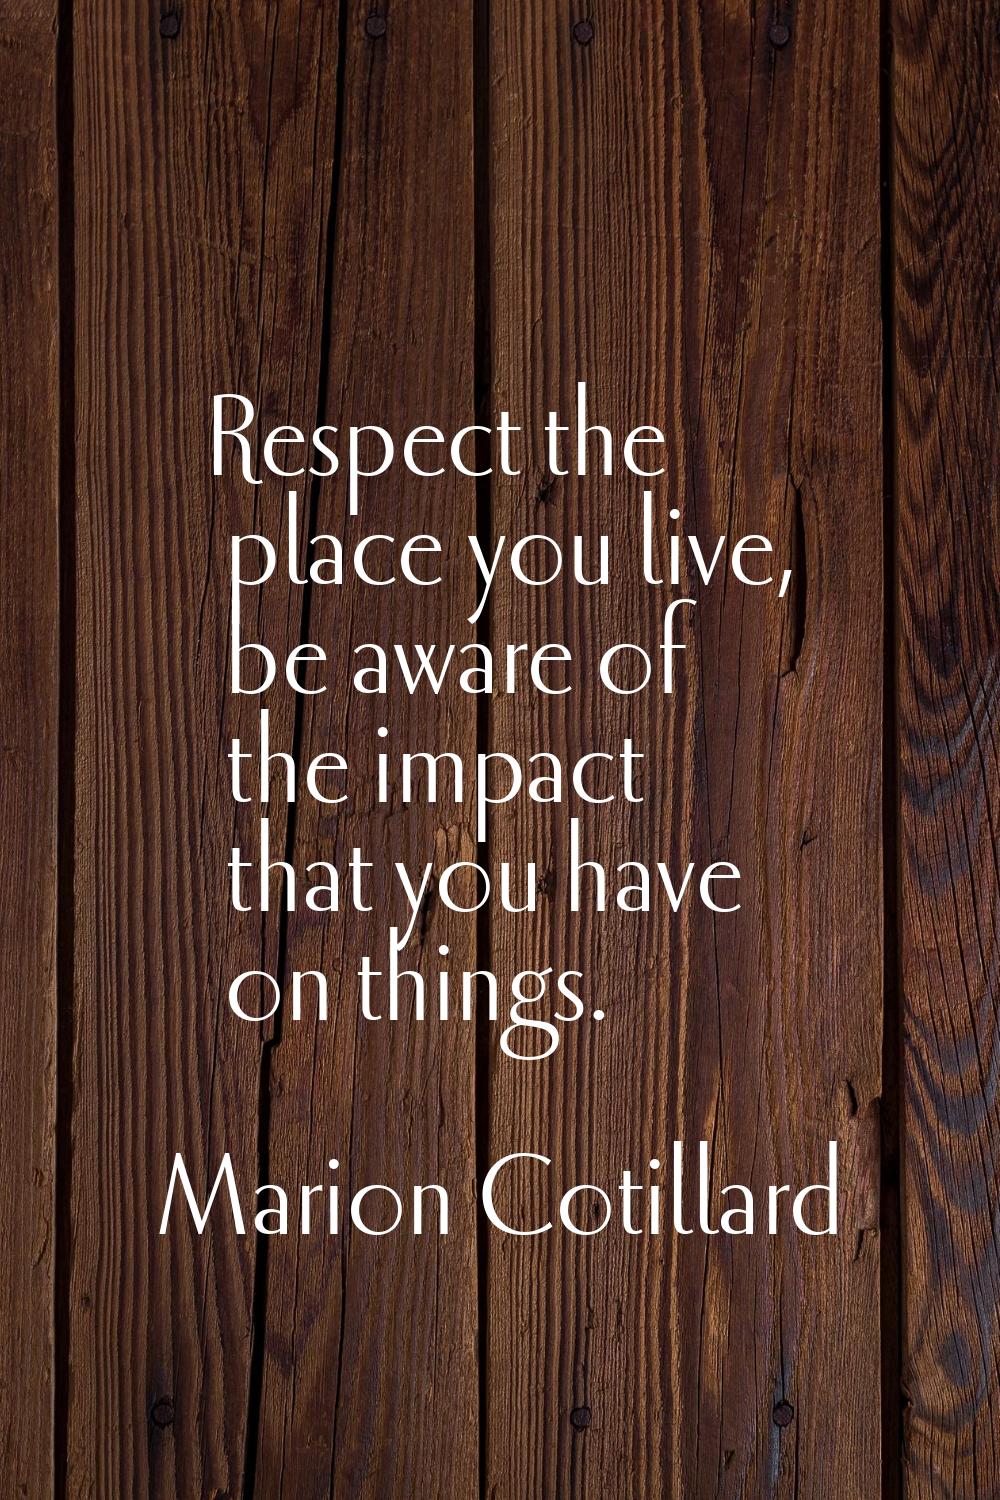 Respect the place you live, be aware of the impact that you have on things.